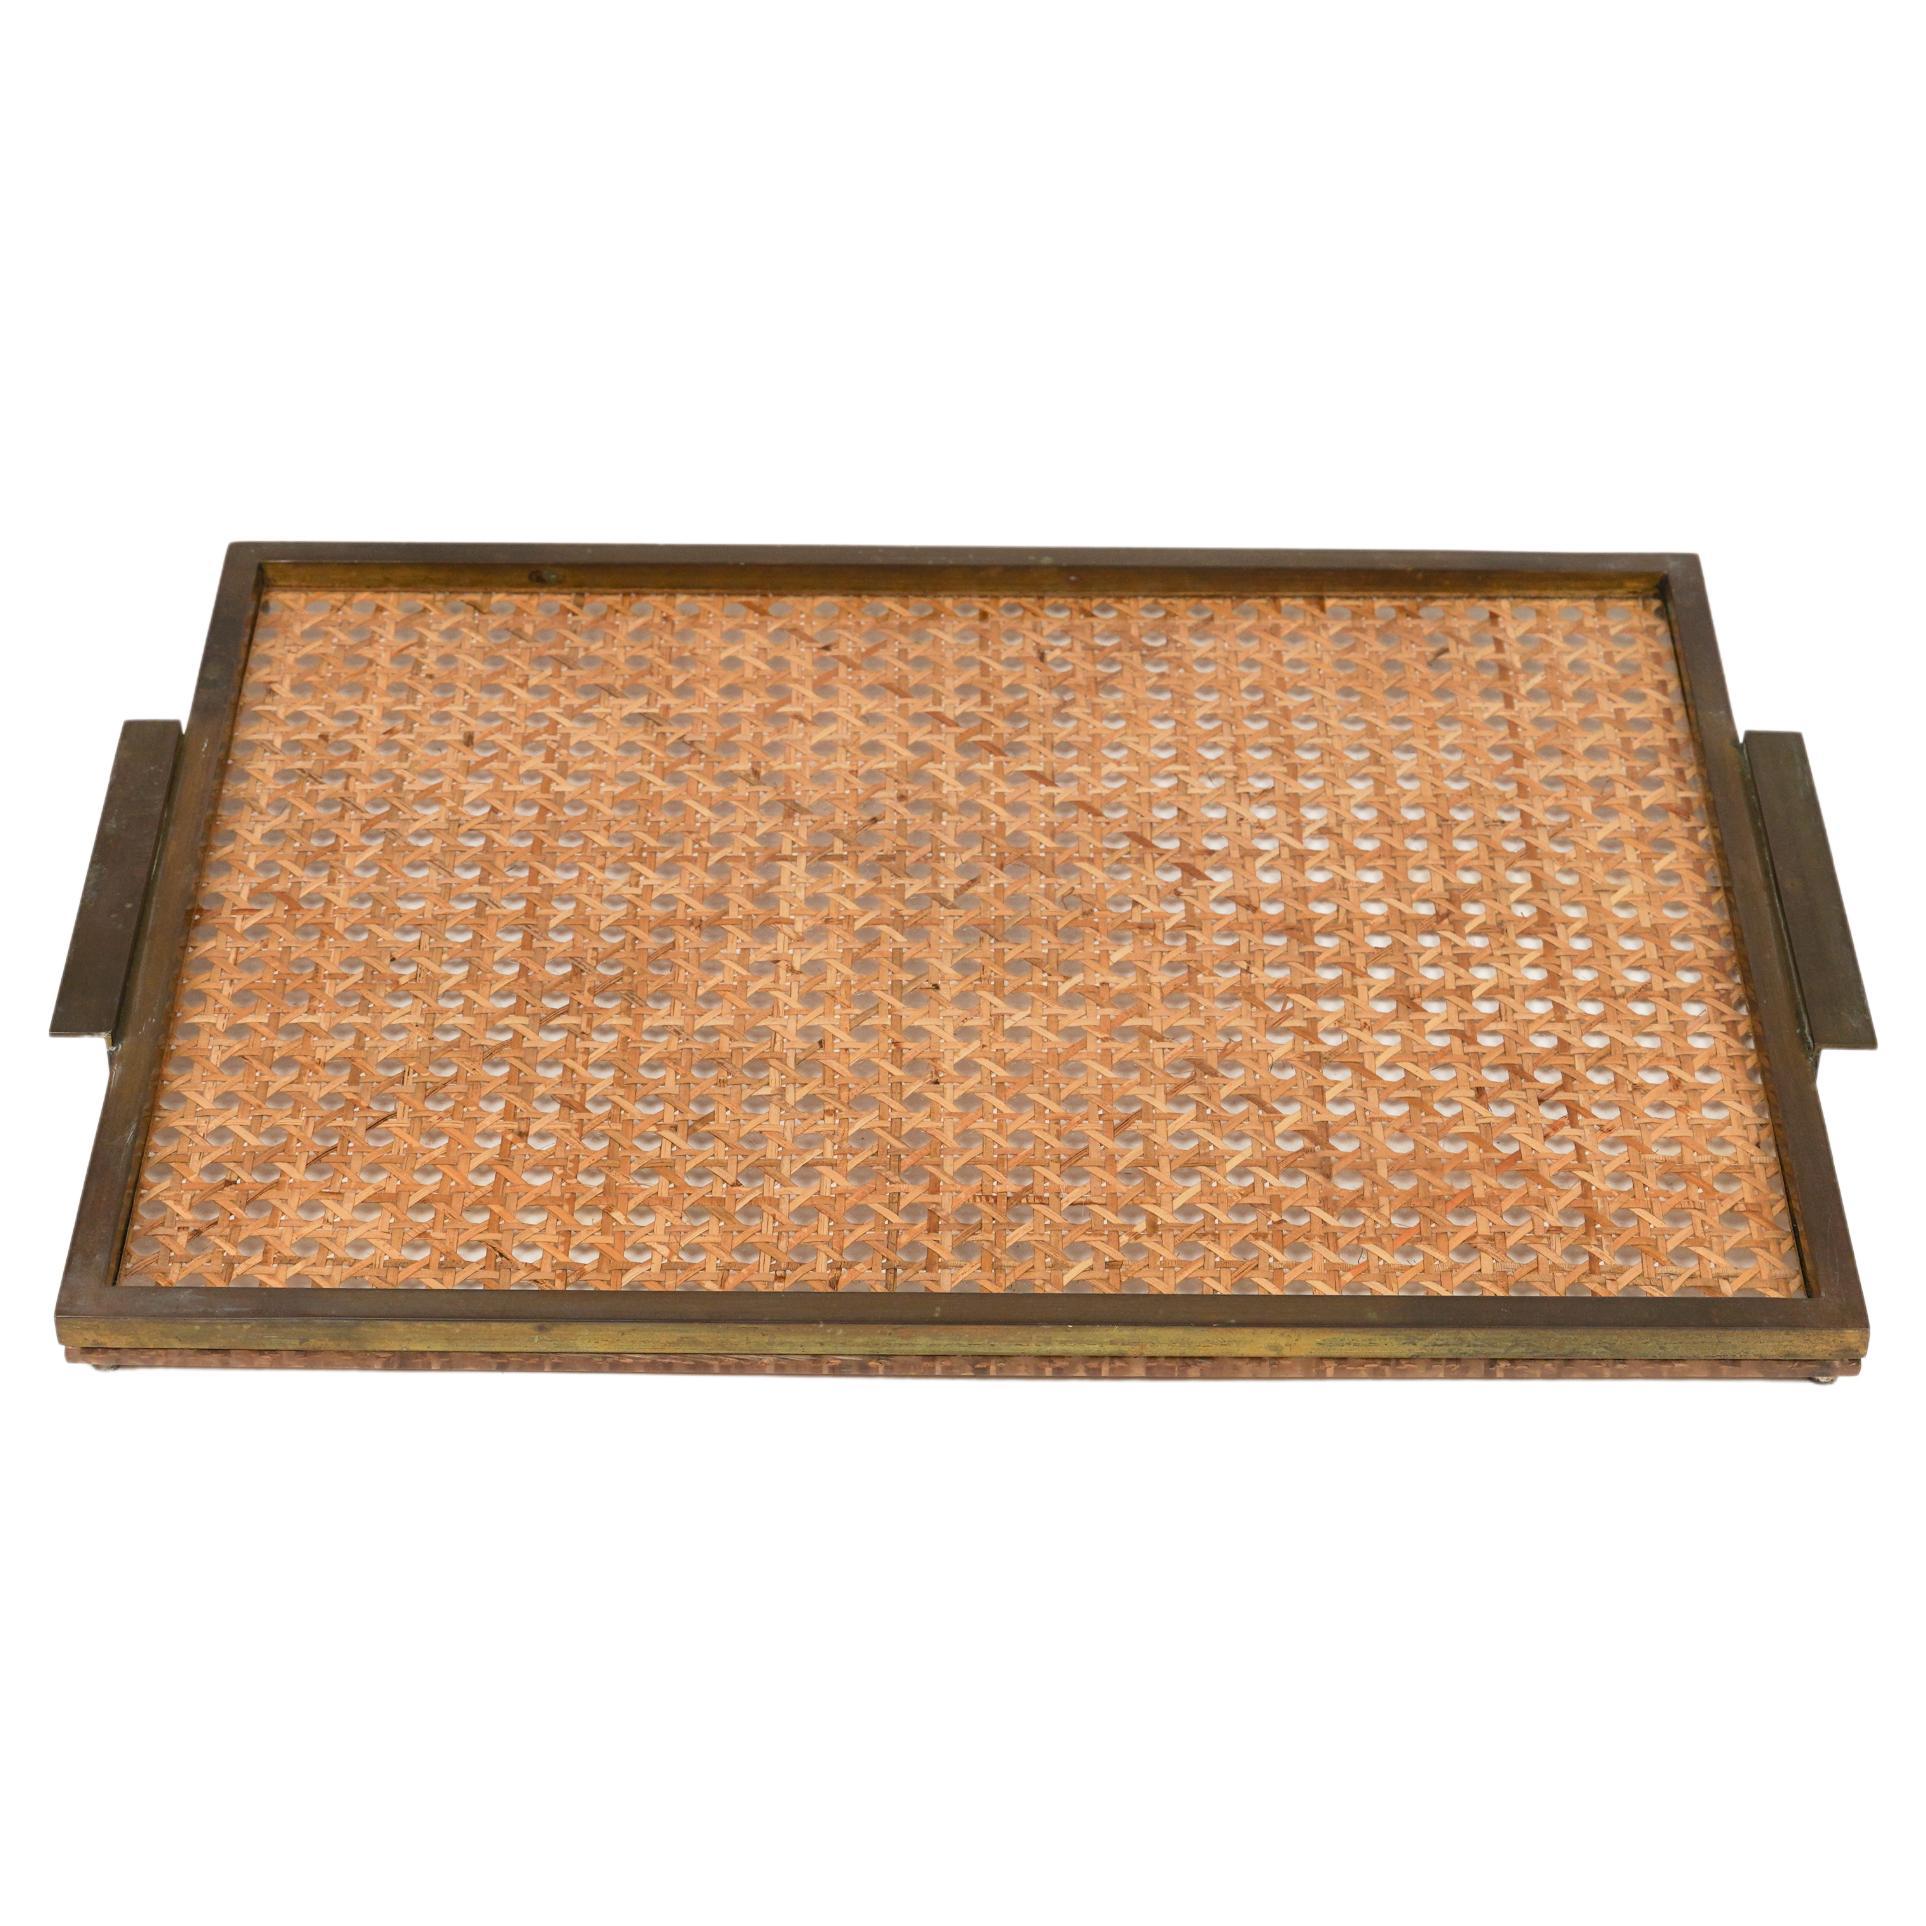 Serving Tray in Lucite, Rattan & Brass Christian Dior Style, Italy, 1970s